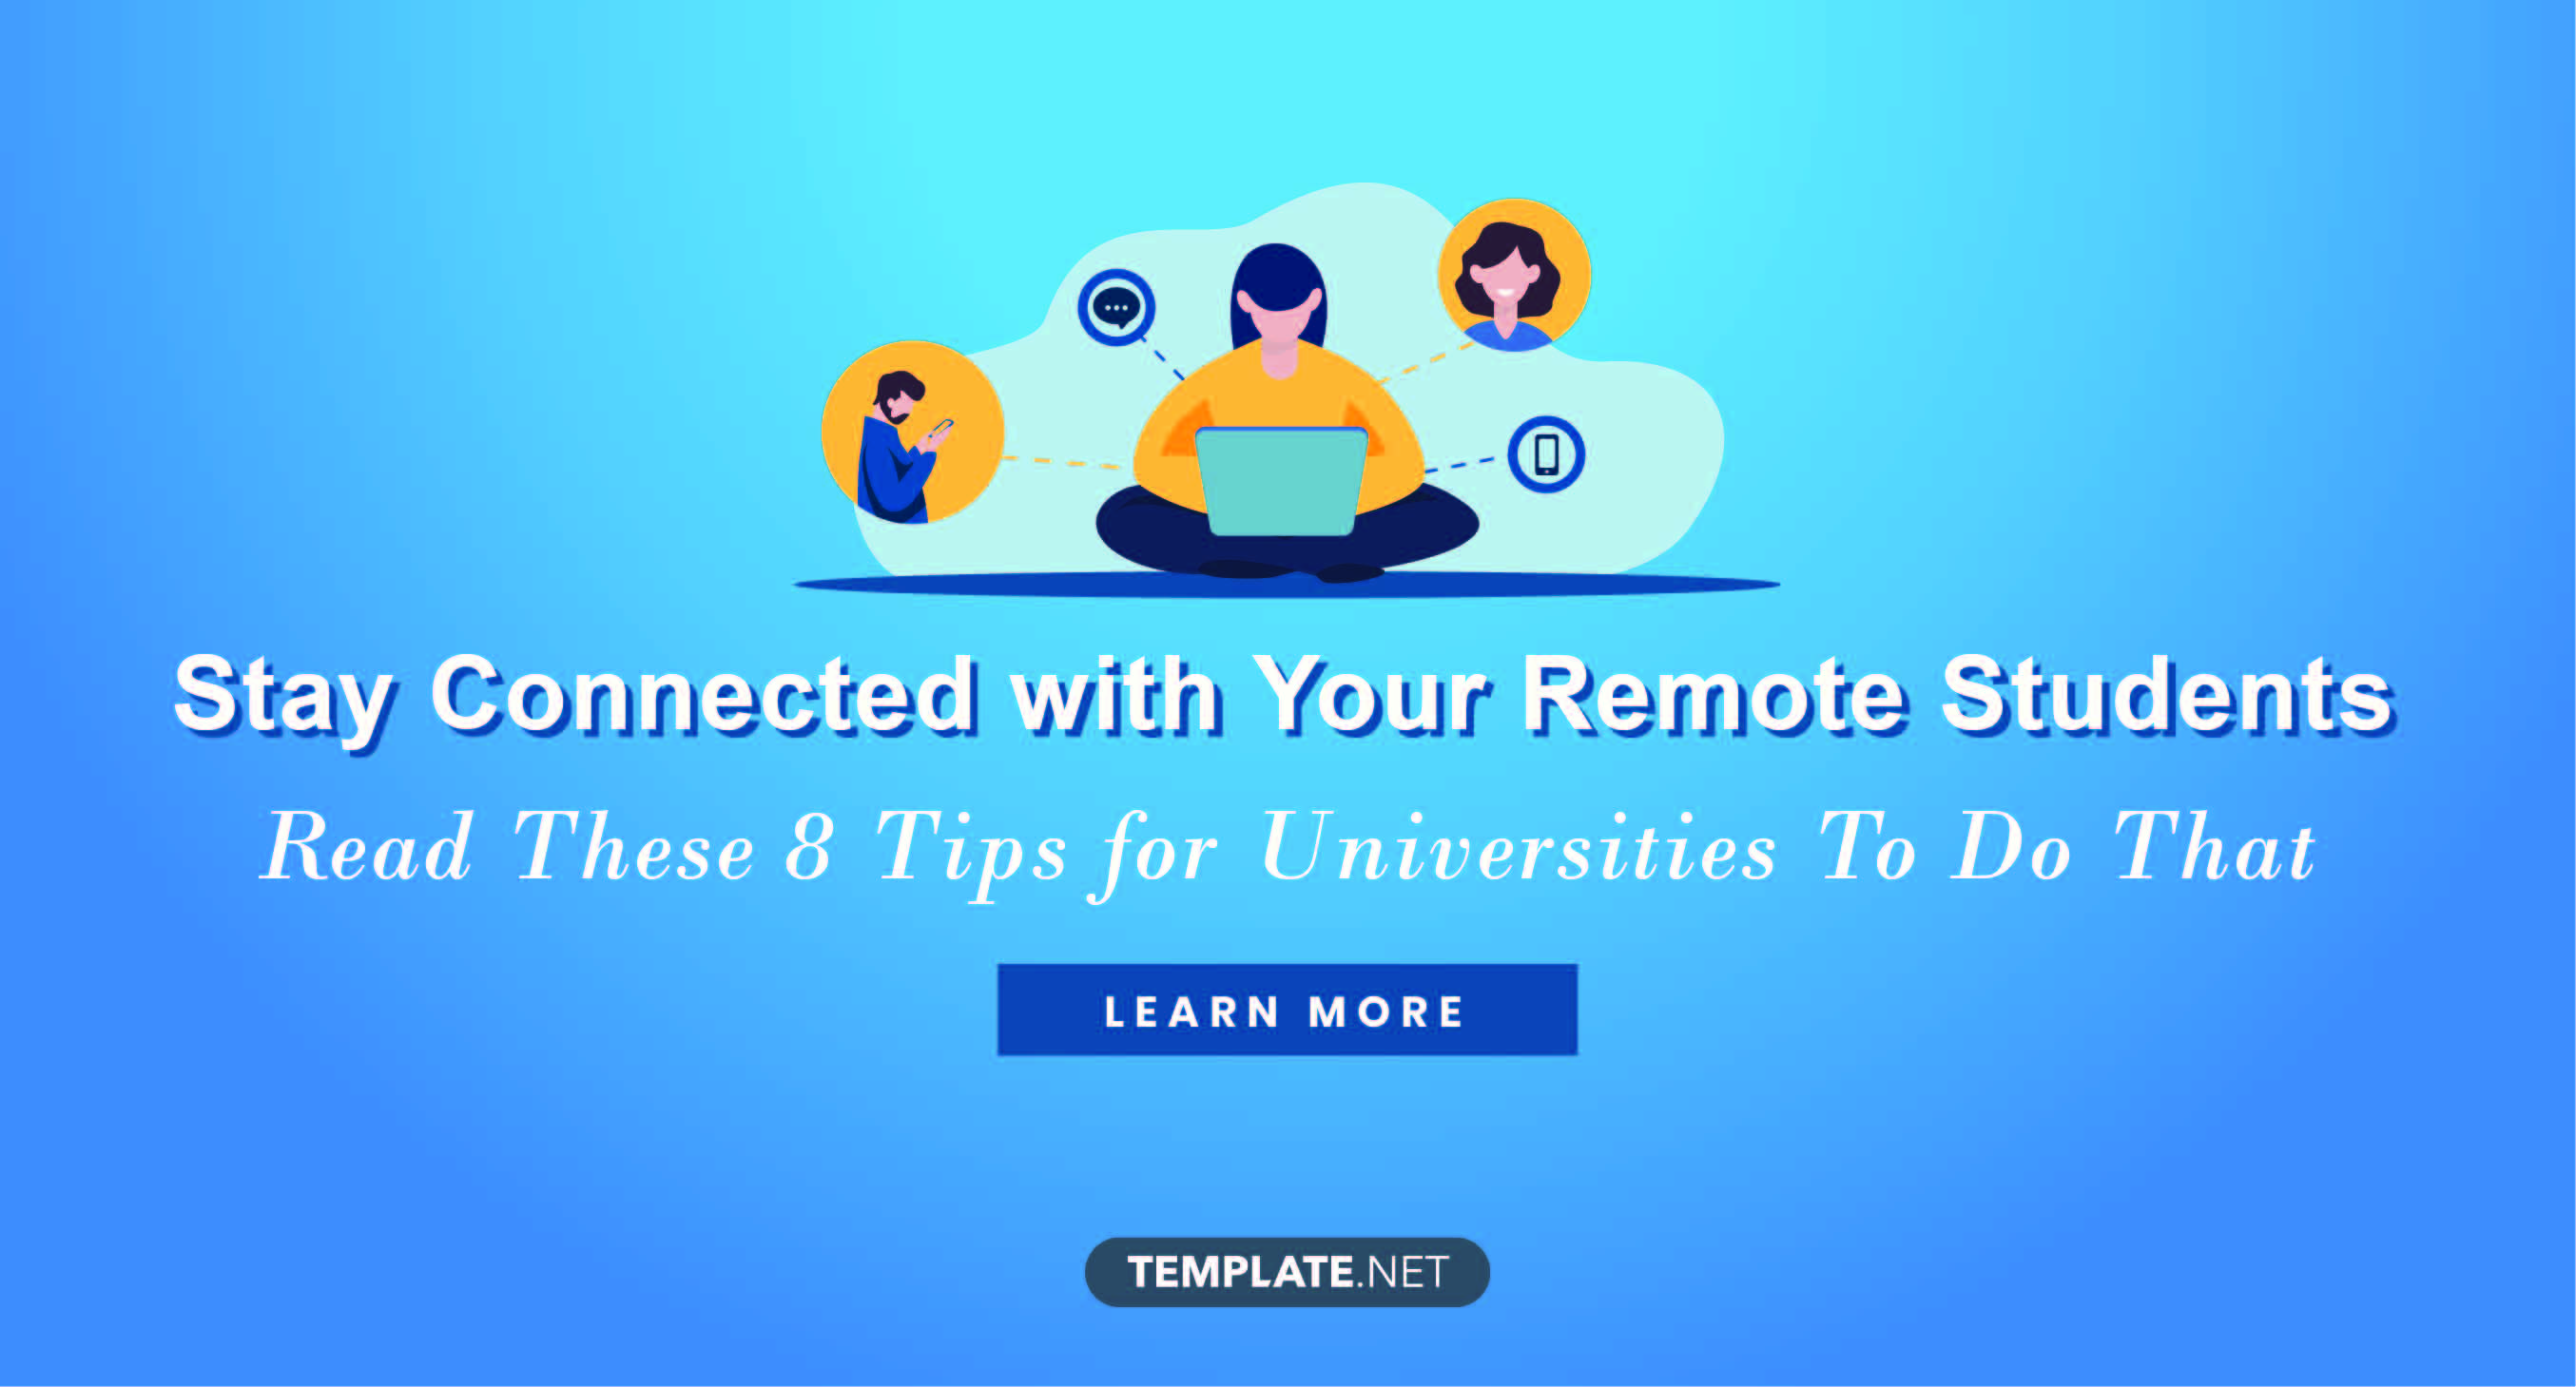  tips for universities to stay connected with their remote students